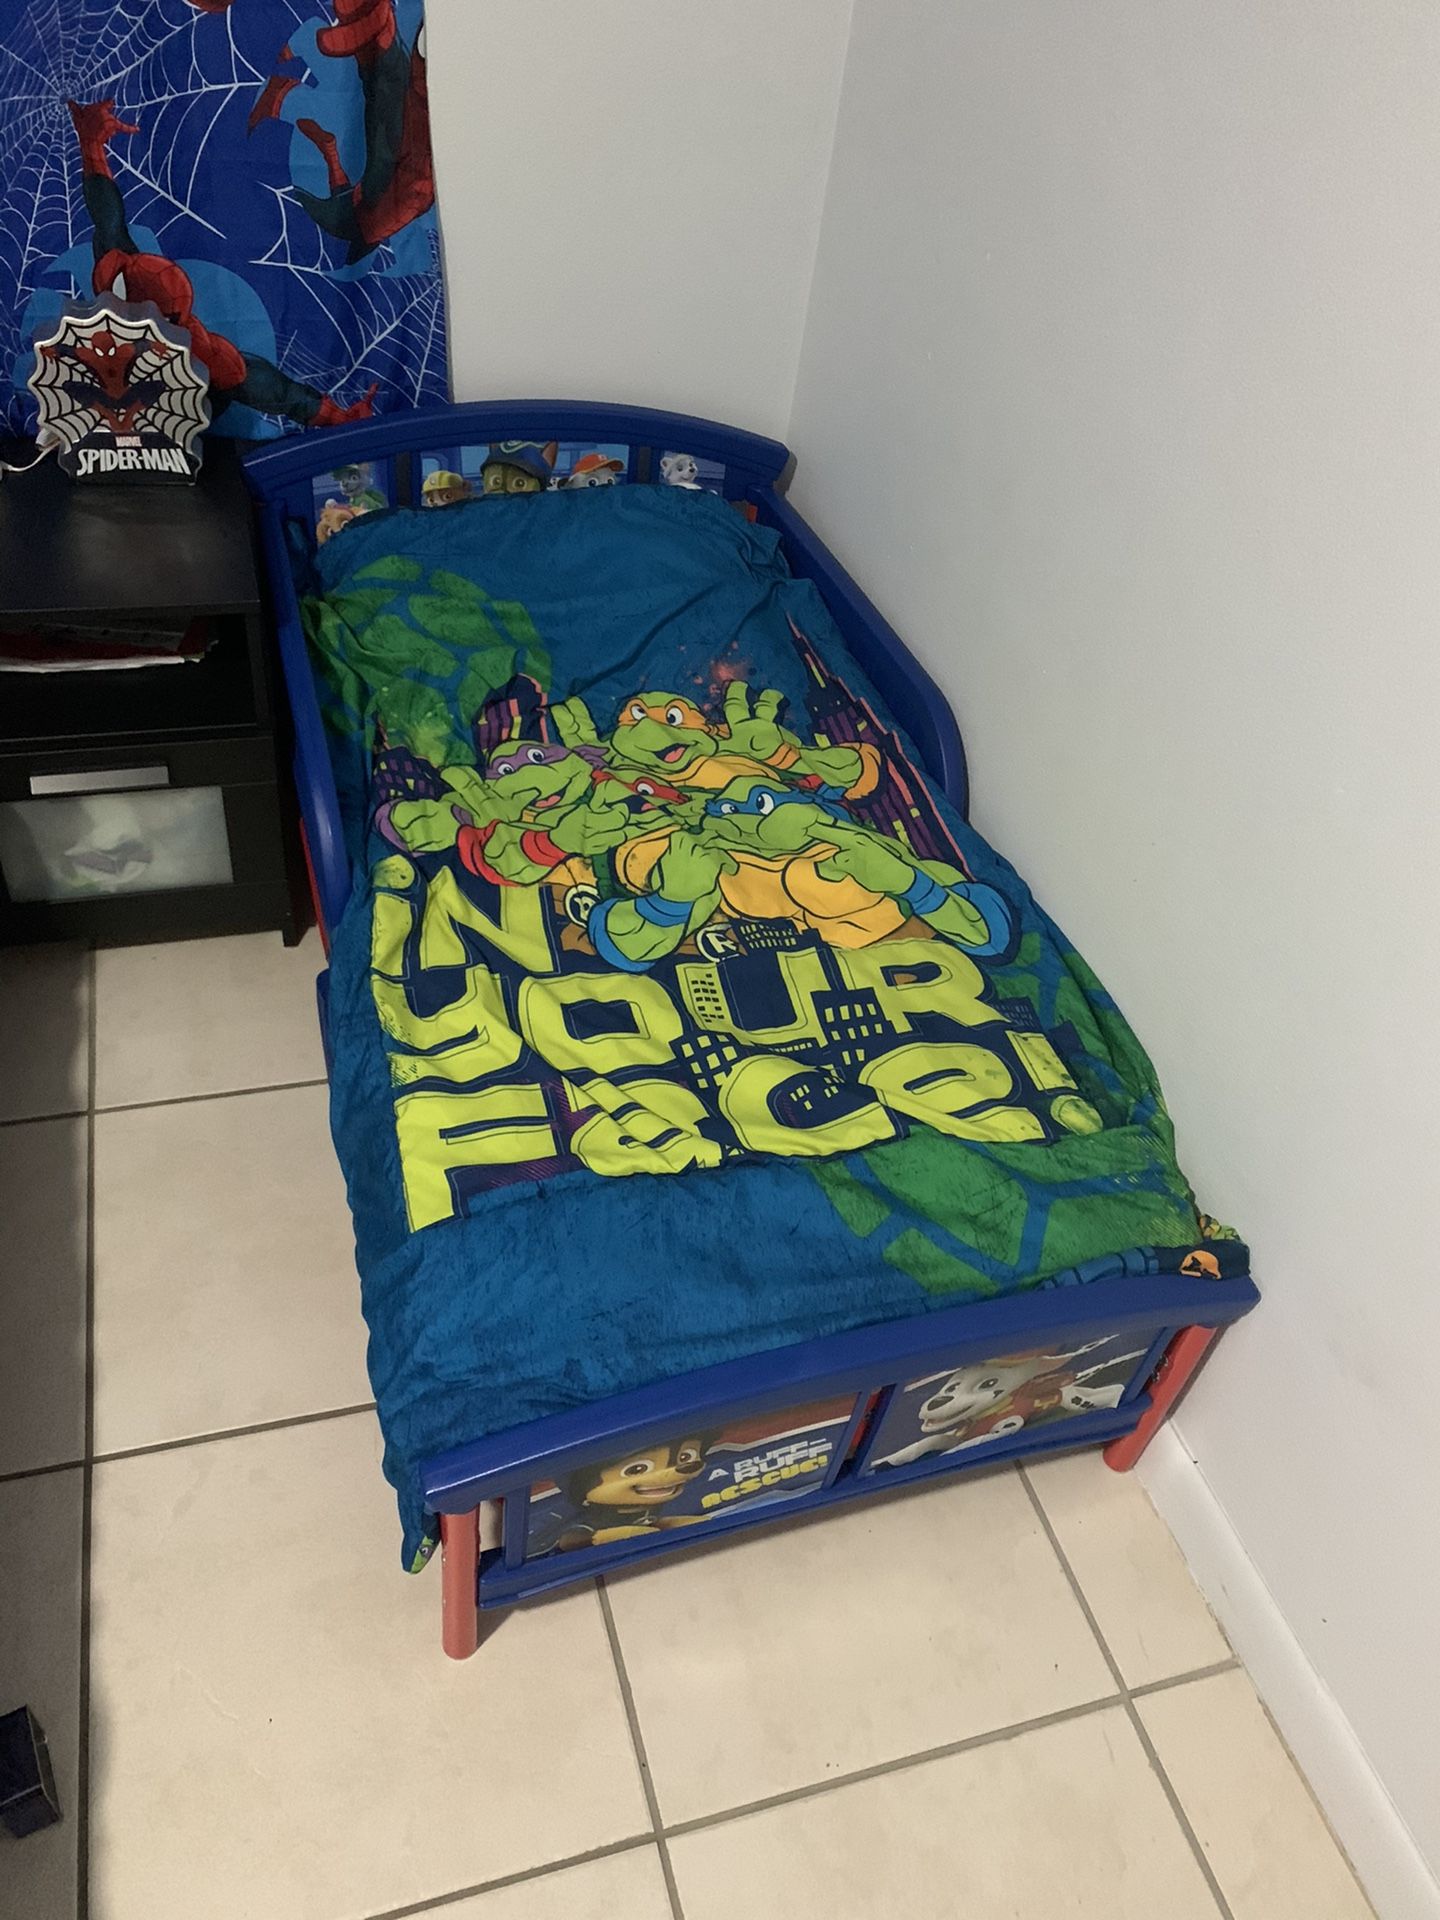 Toddler bed with mattress (pee pee proof) and kid chair.